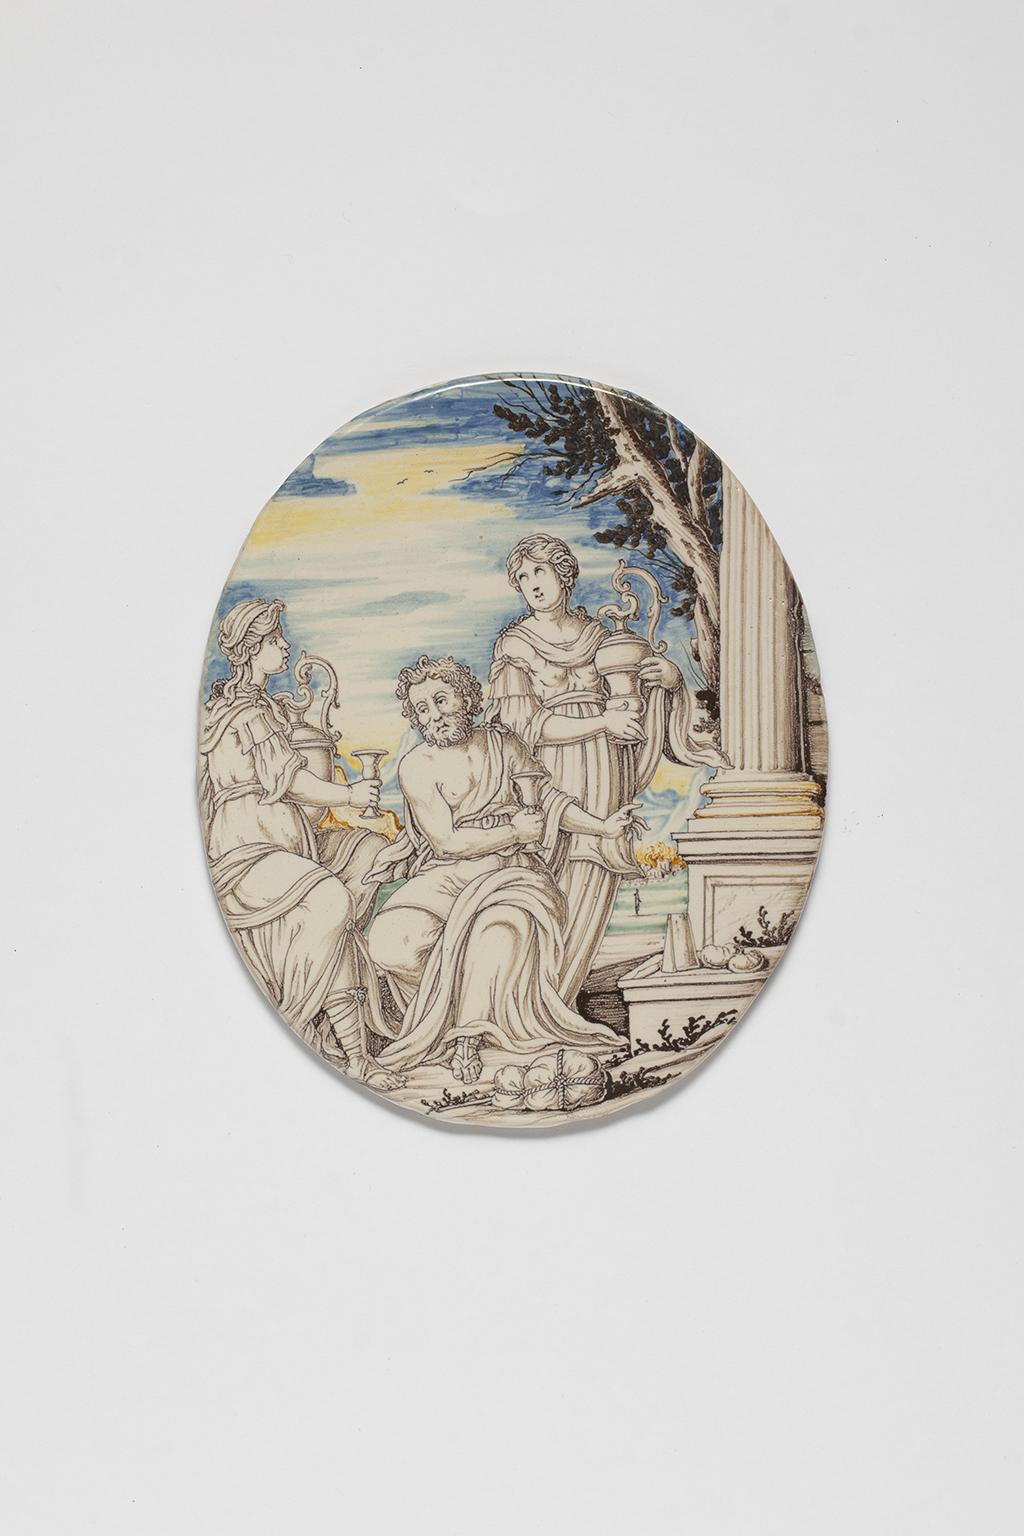 Early 18th Century Ancient Maiolica Tiles, Ambrogette, Rampini Manufactory, Pavia, 1693-1704 For Sale